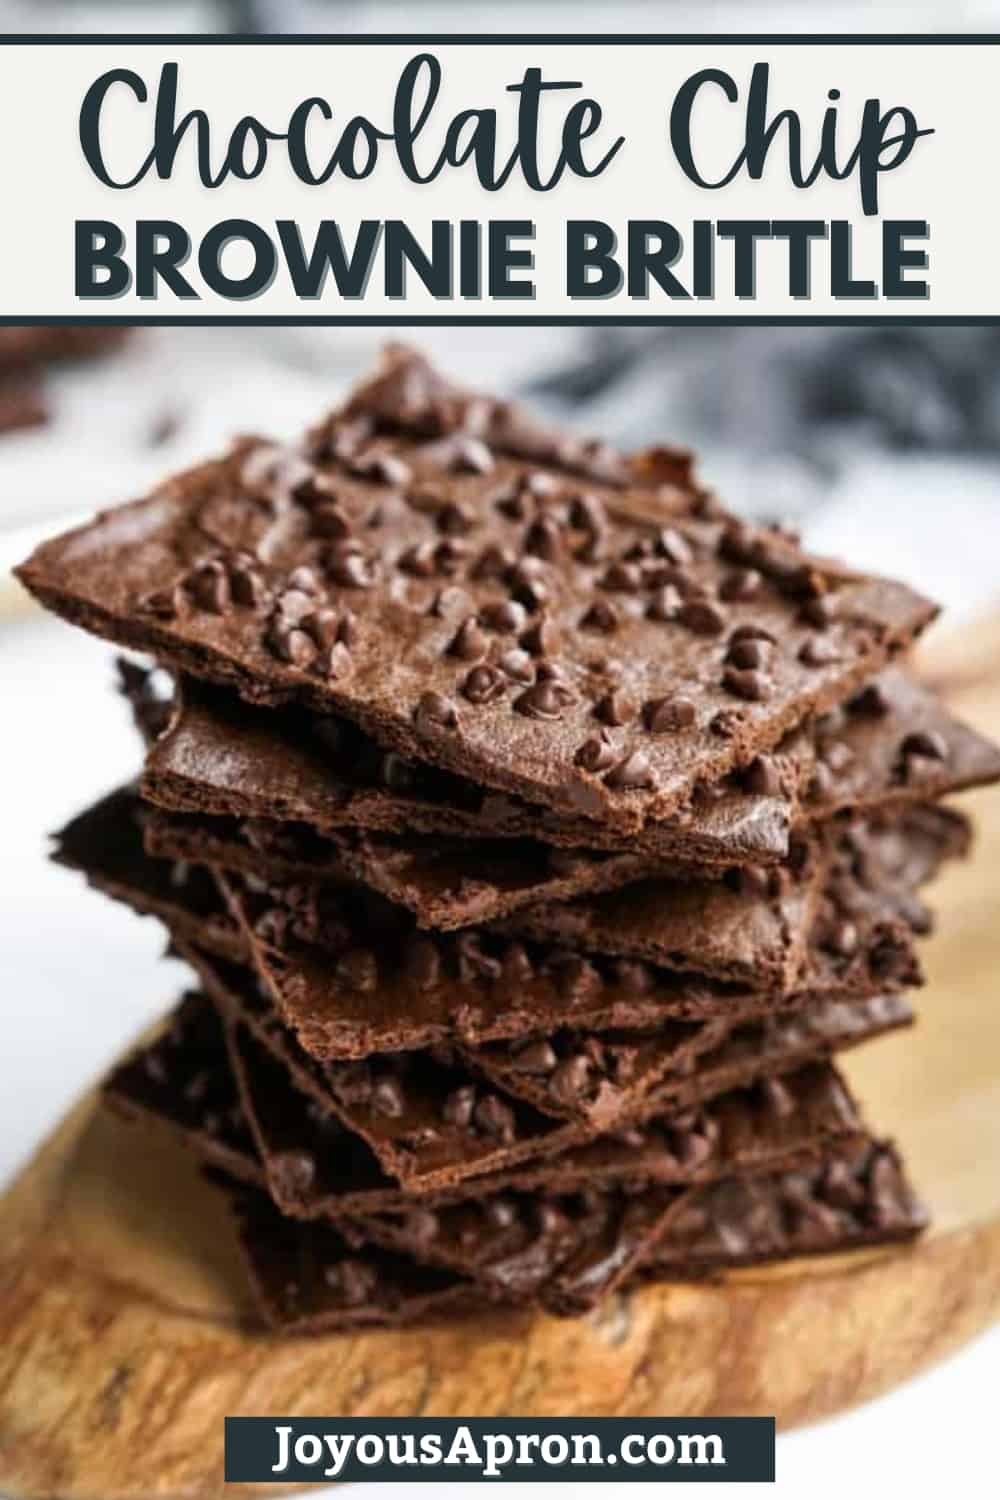 Brownie Brittle: These thin and crispy chocolate brownie bites makes the best sweet treat, snack and dessert. They are loaded with chocolate chips and are rich and decadent in flavor. via @joyousapron